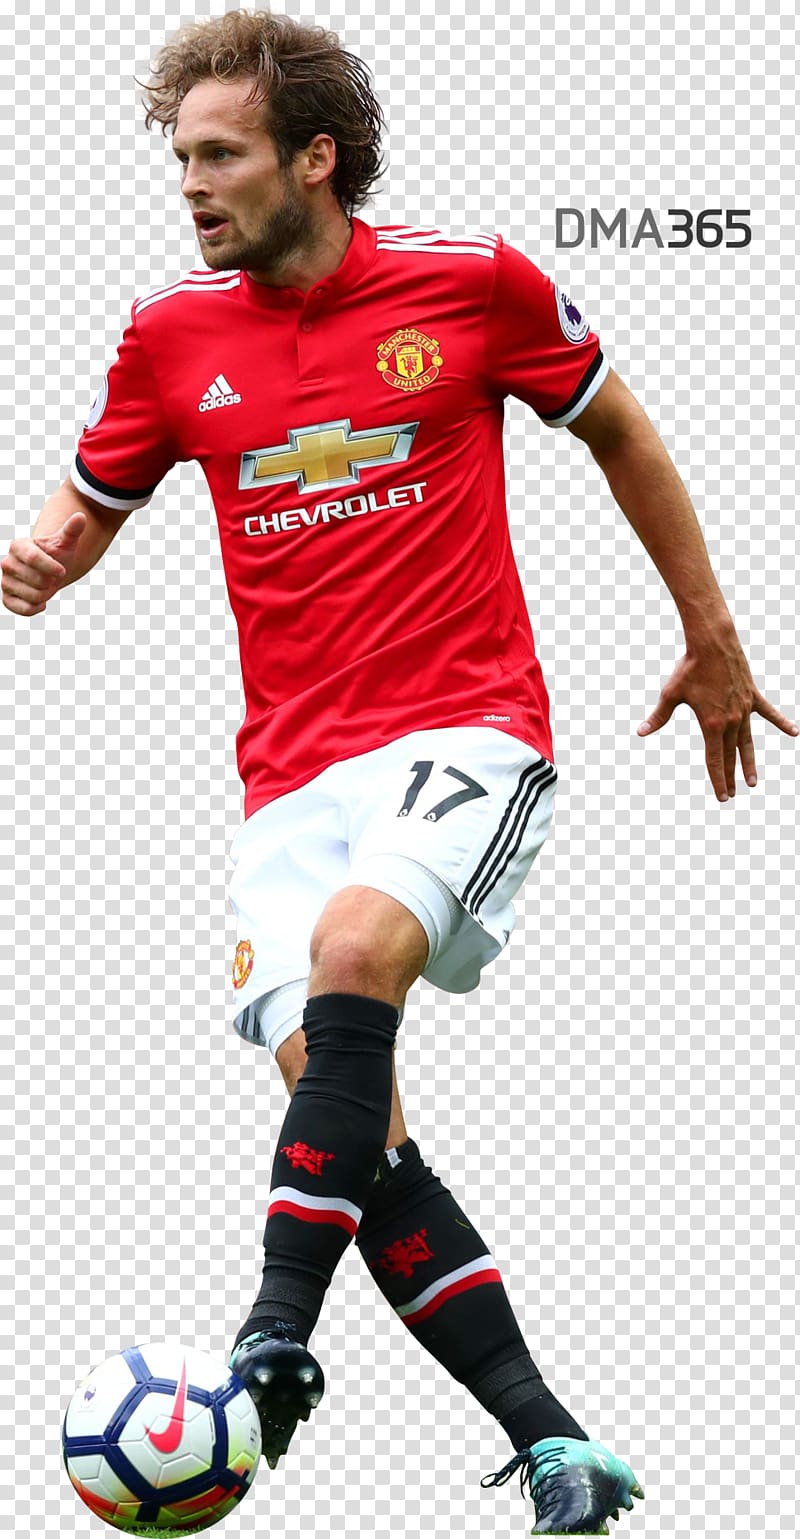 Daley Blind Jersey Soccer player Football Sport, daley blind transparent background PNG clipart